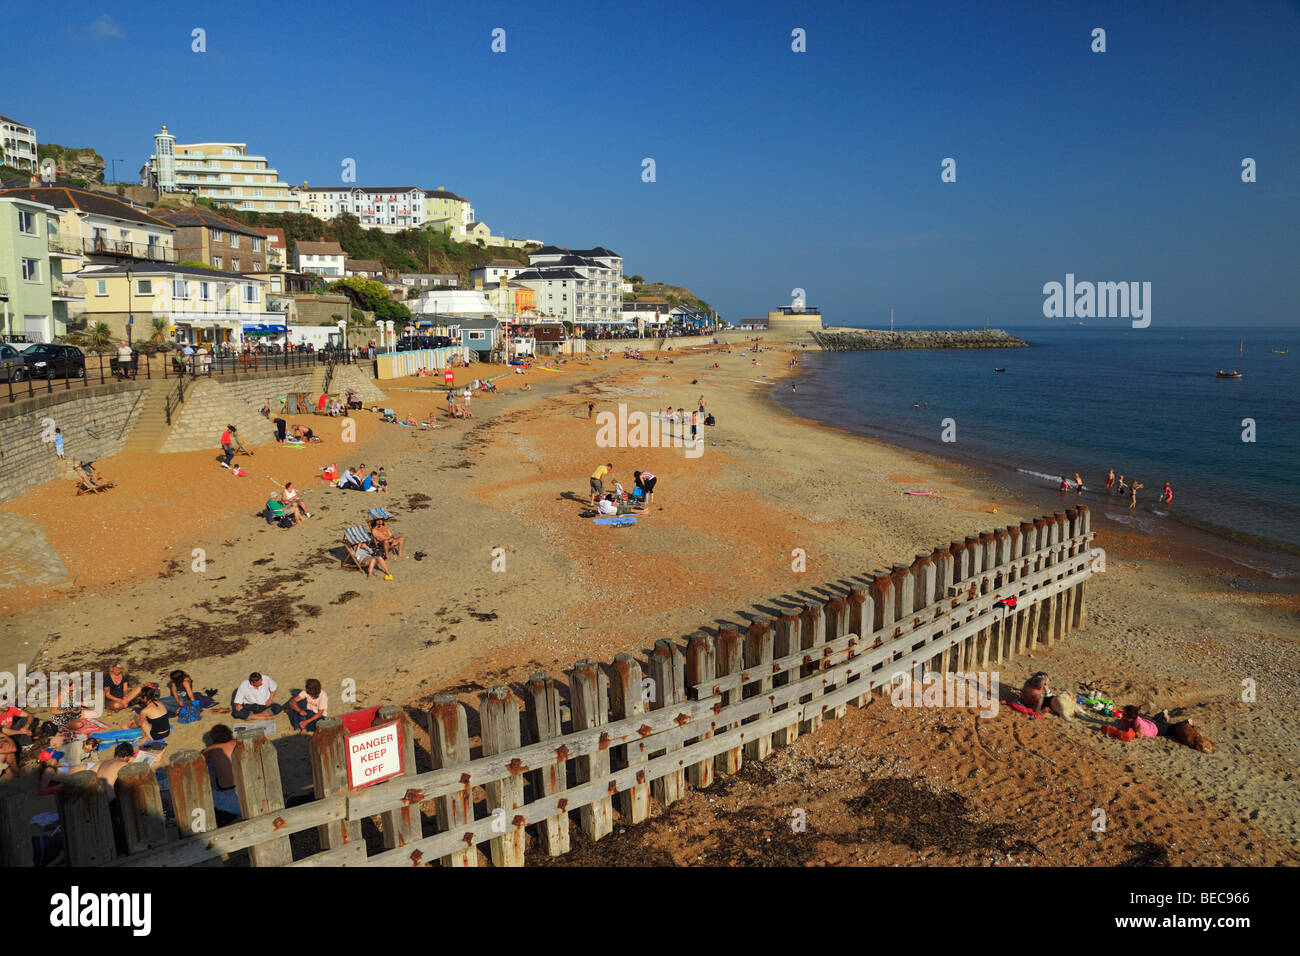 The beach at Ventnor Isle of Wight, England, UK. Stock Photo